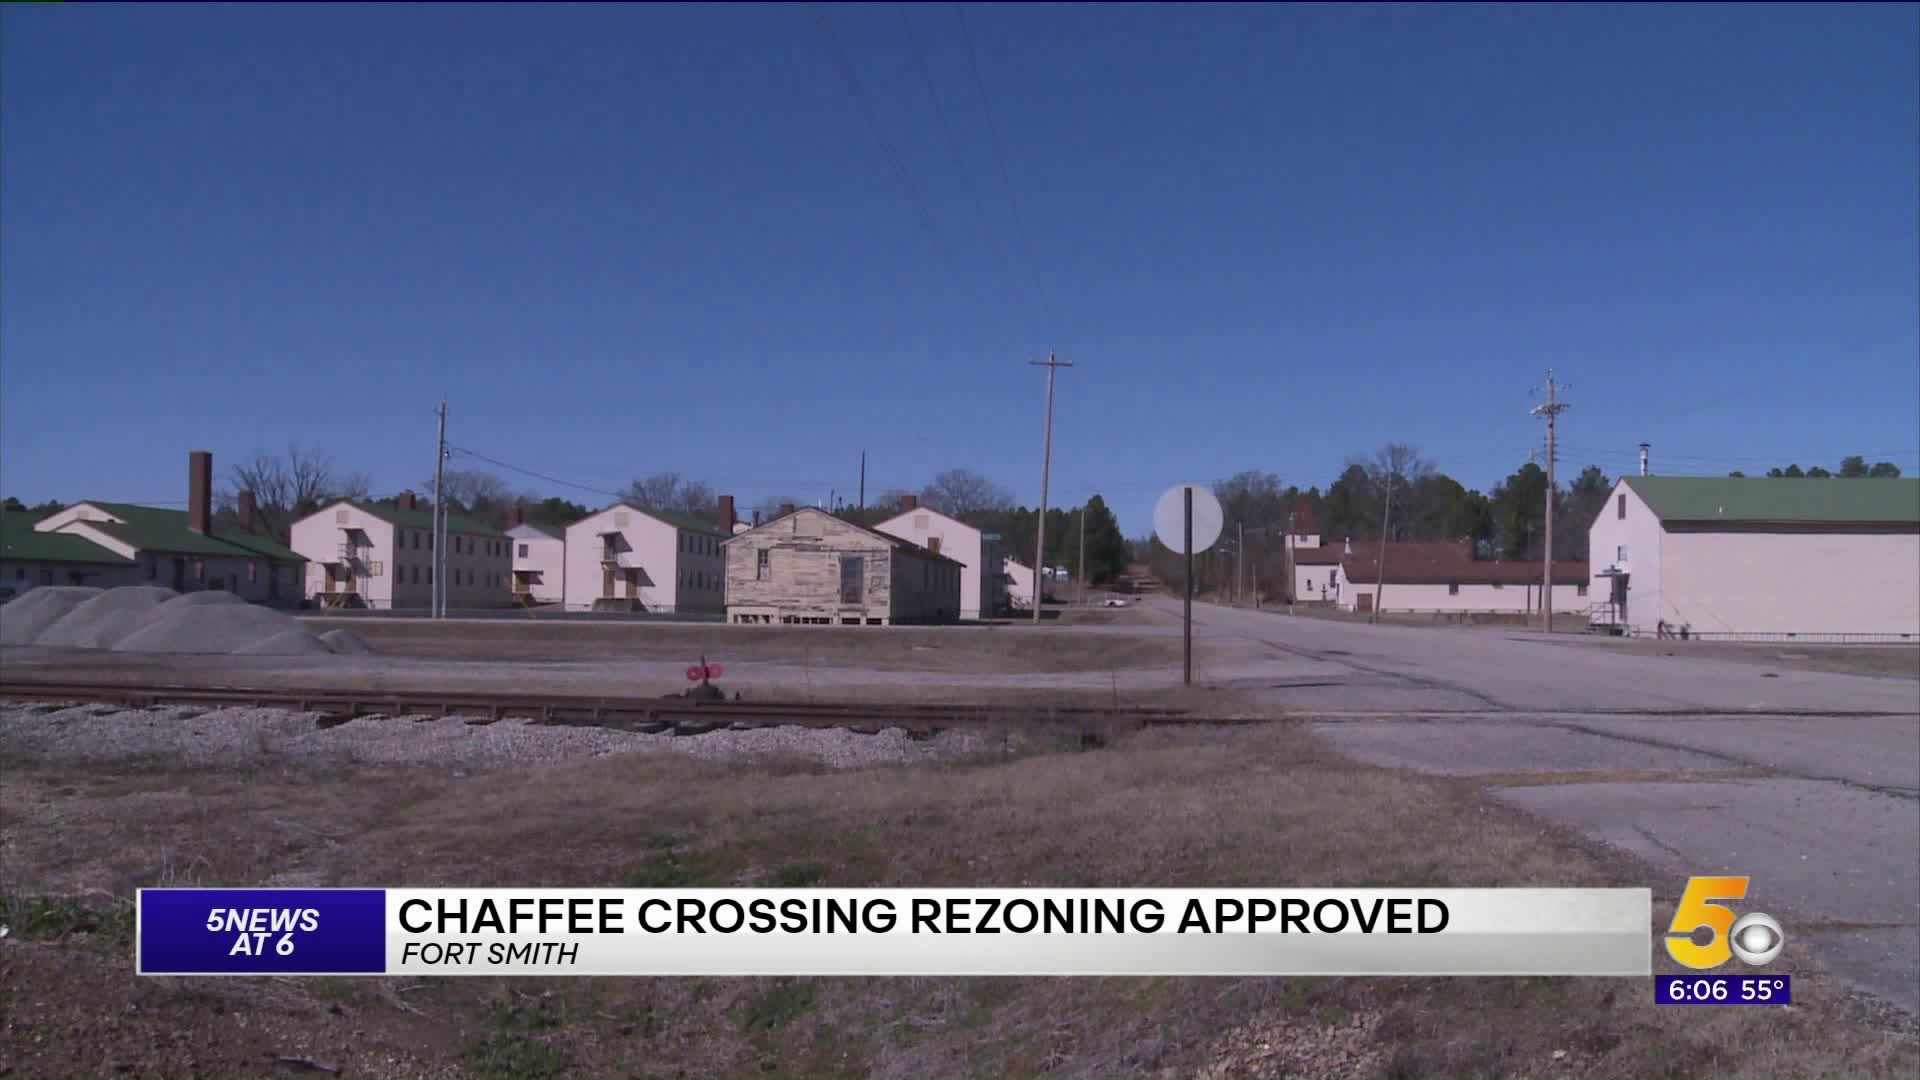 Fort Smith Board Approves Zoning Change With Controversial Chaffee Crossing Area